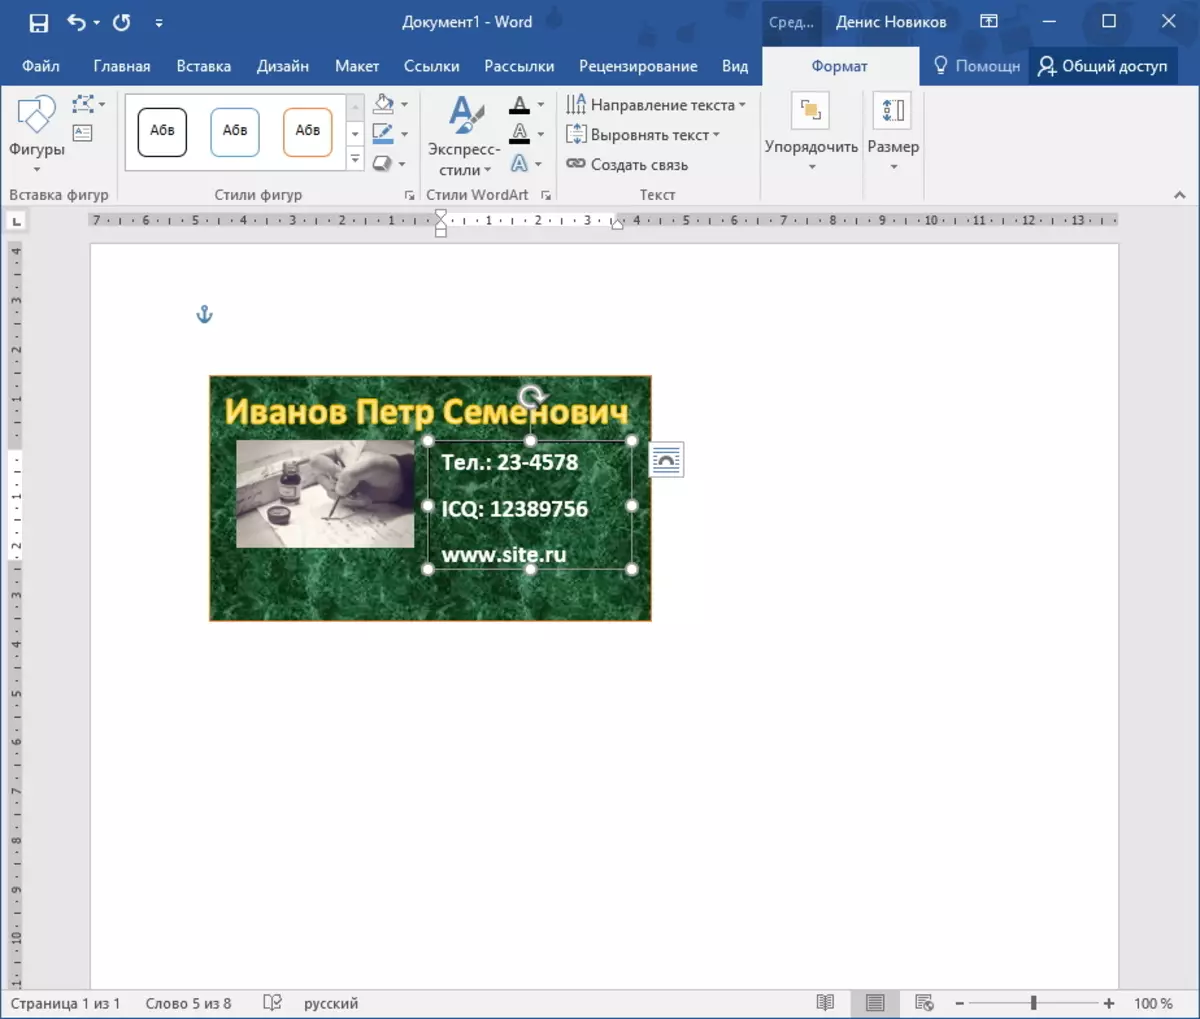 Adding contact information to Word